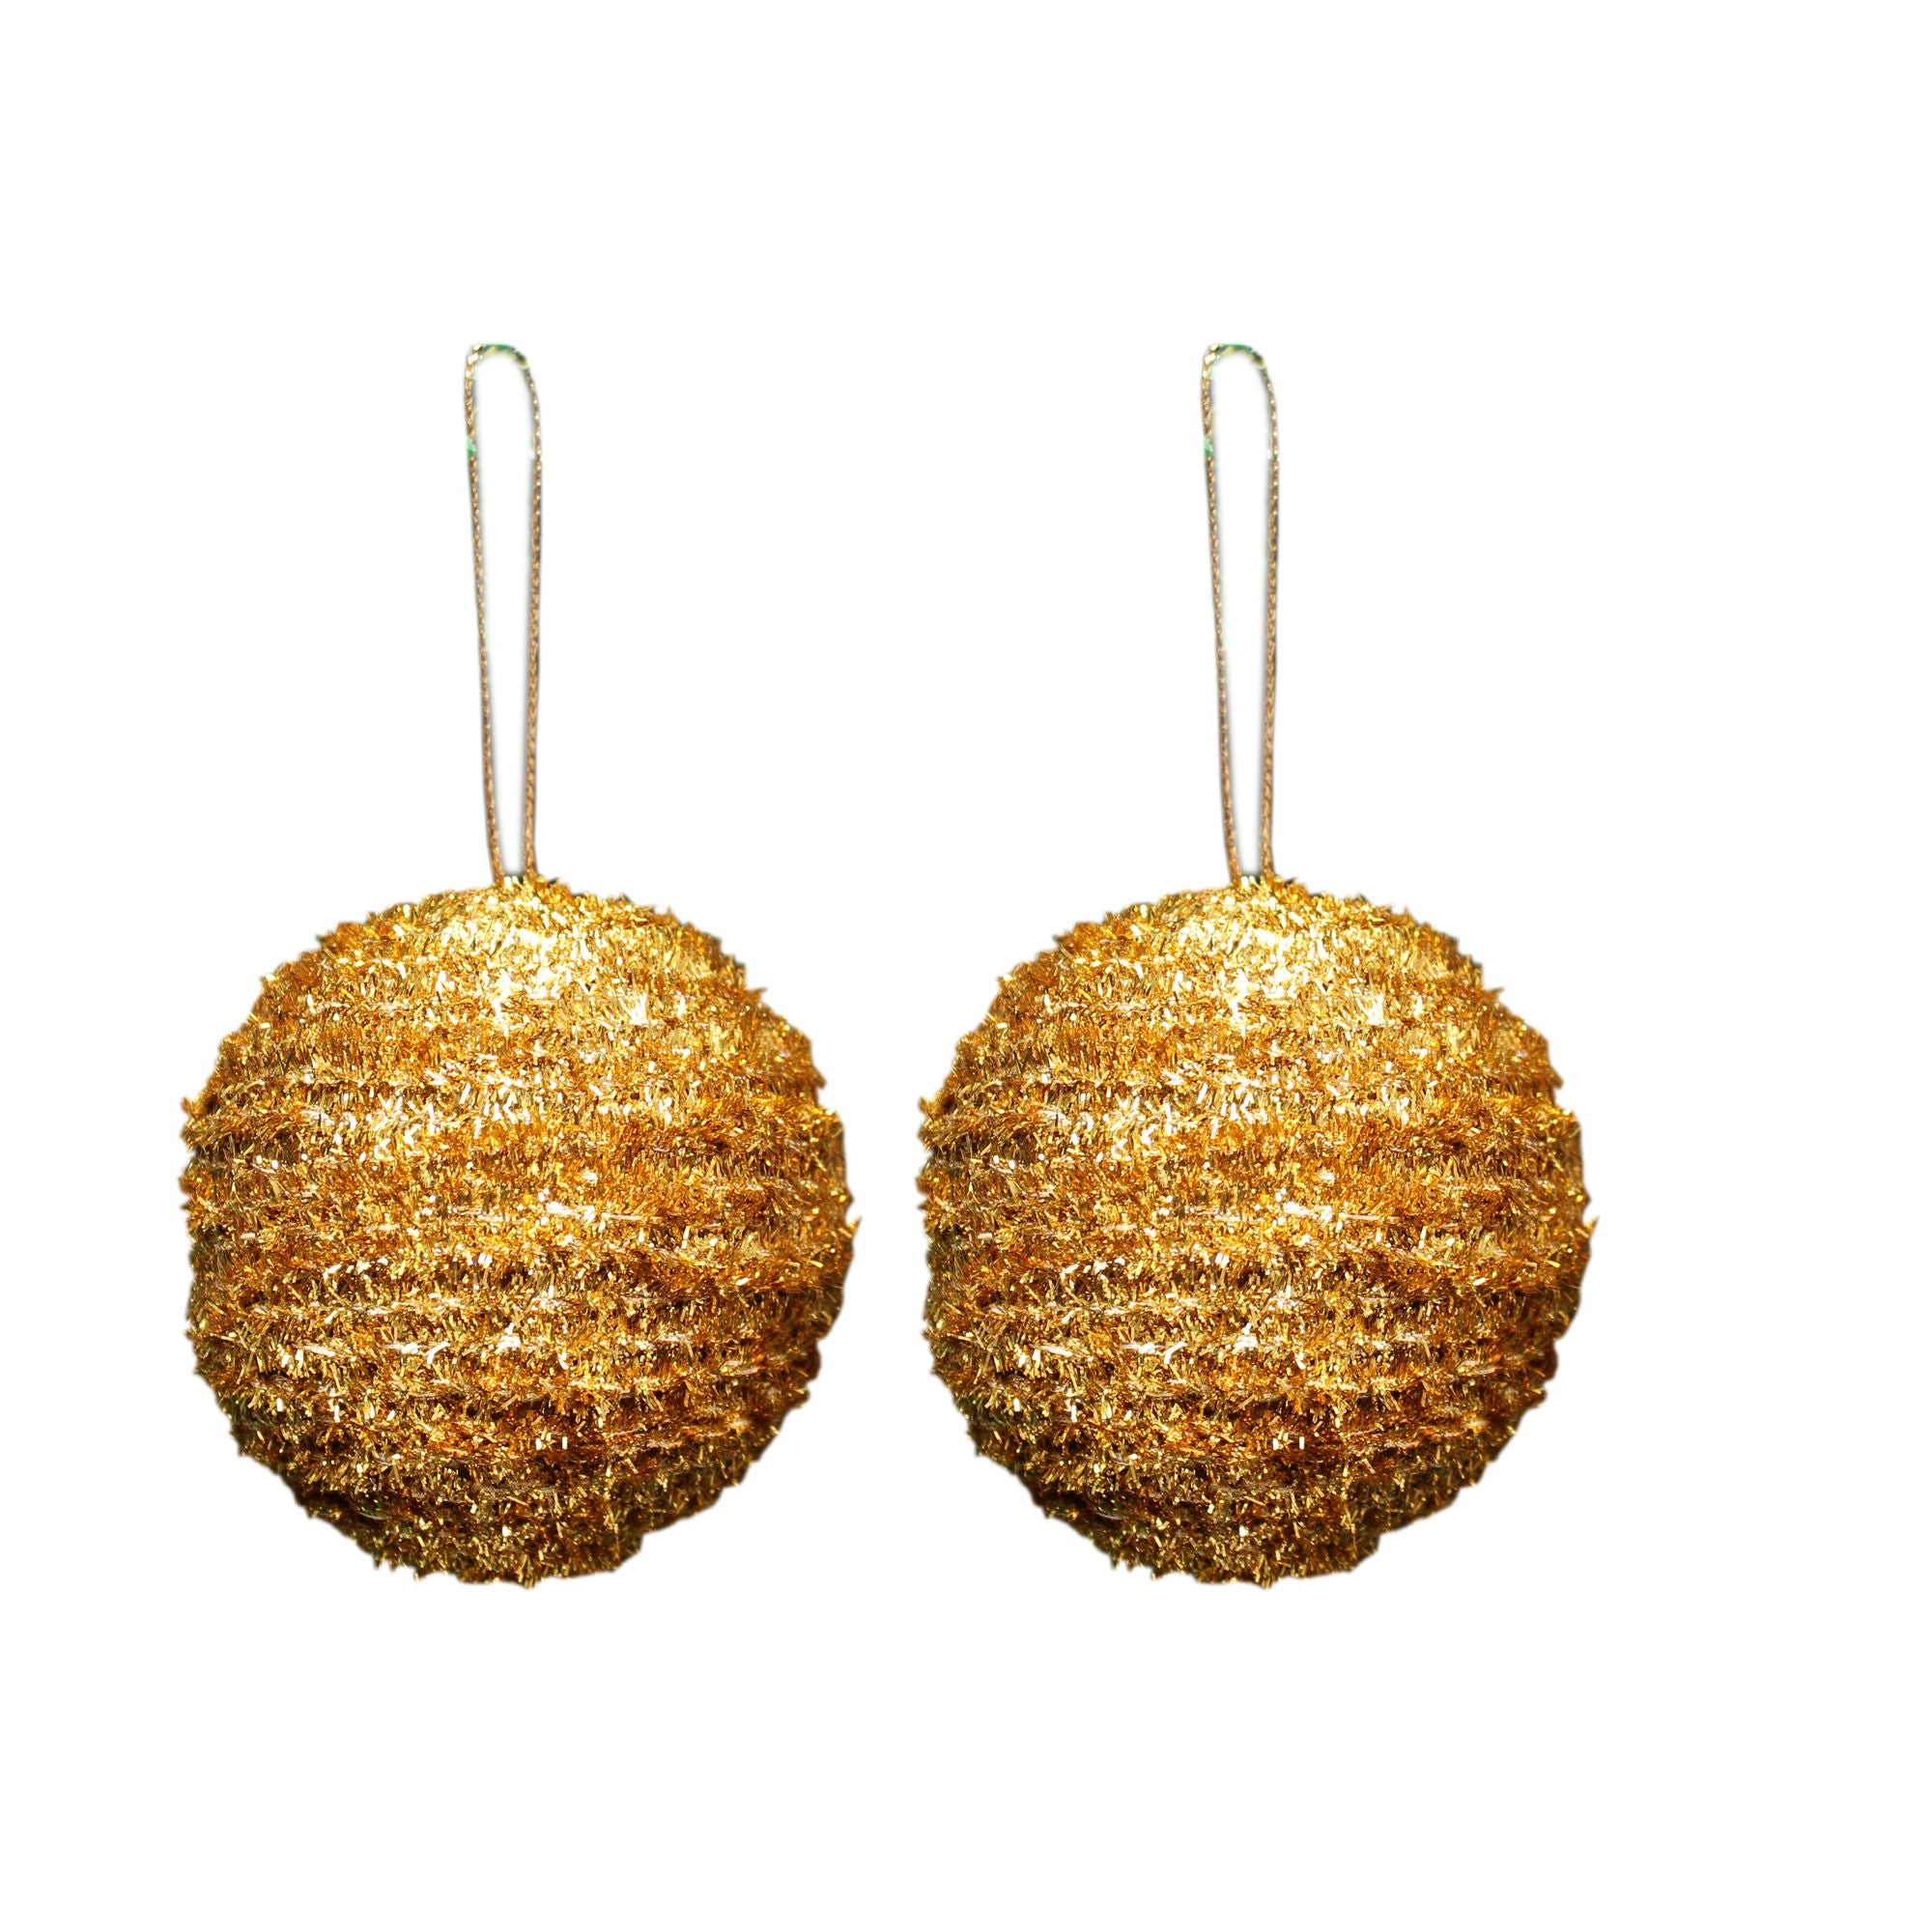 Handmade Christmas Ornaments Tinsel Baubles- 70mm, Gold, 2pc